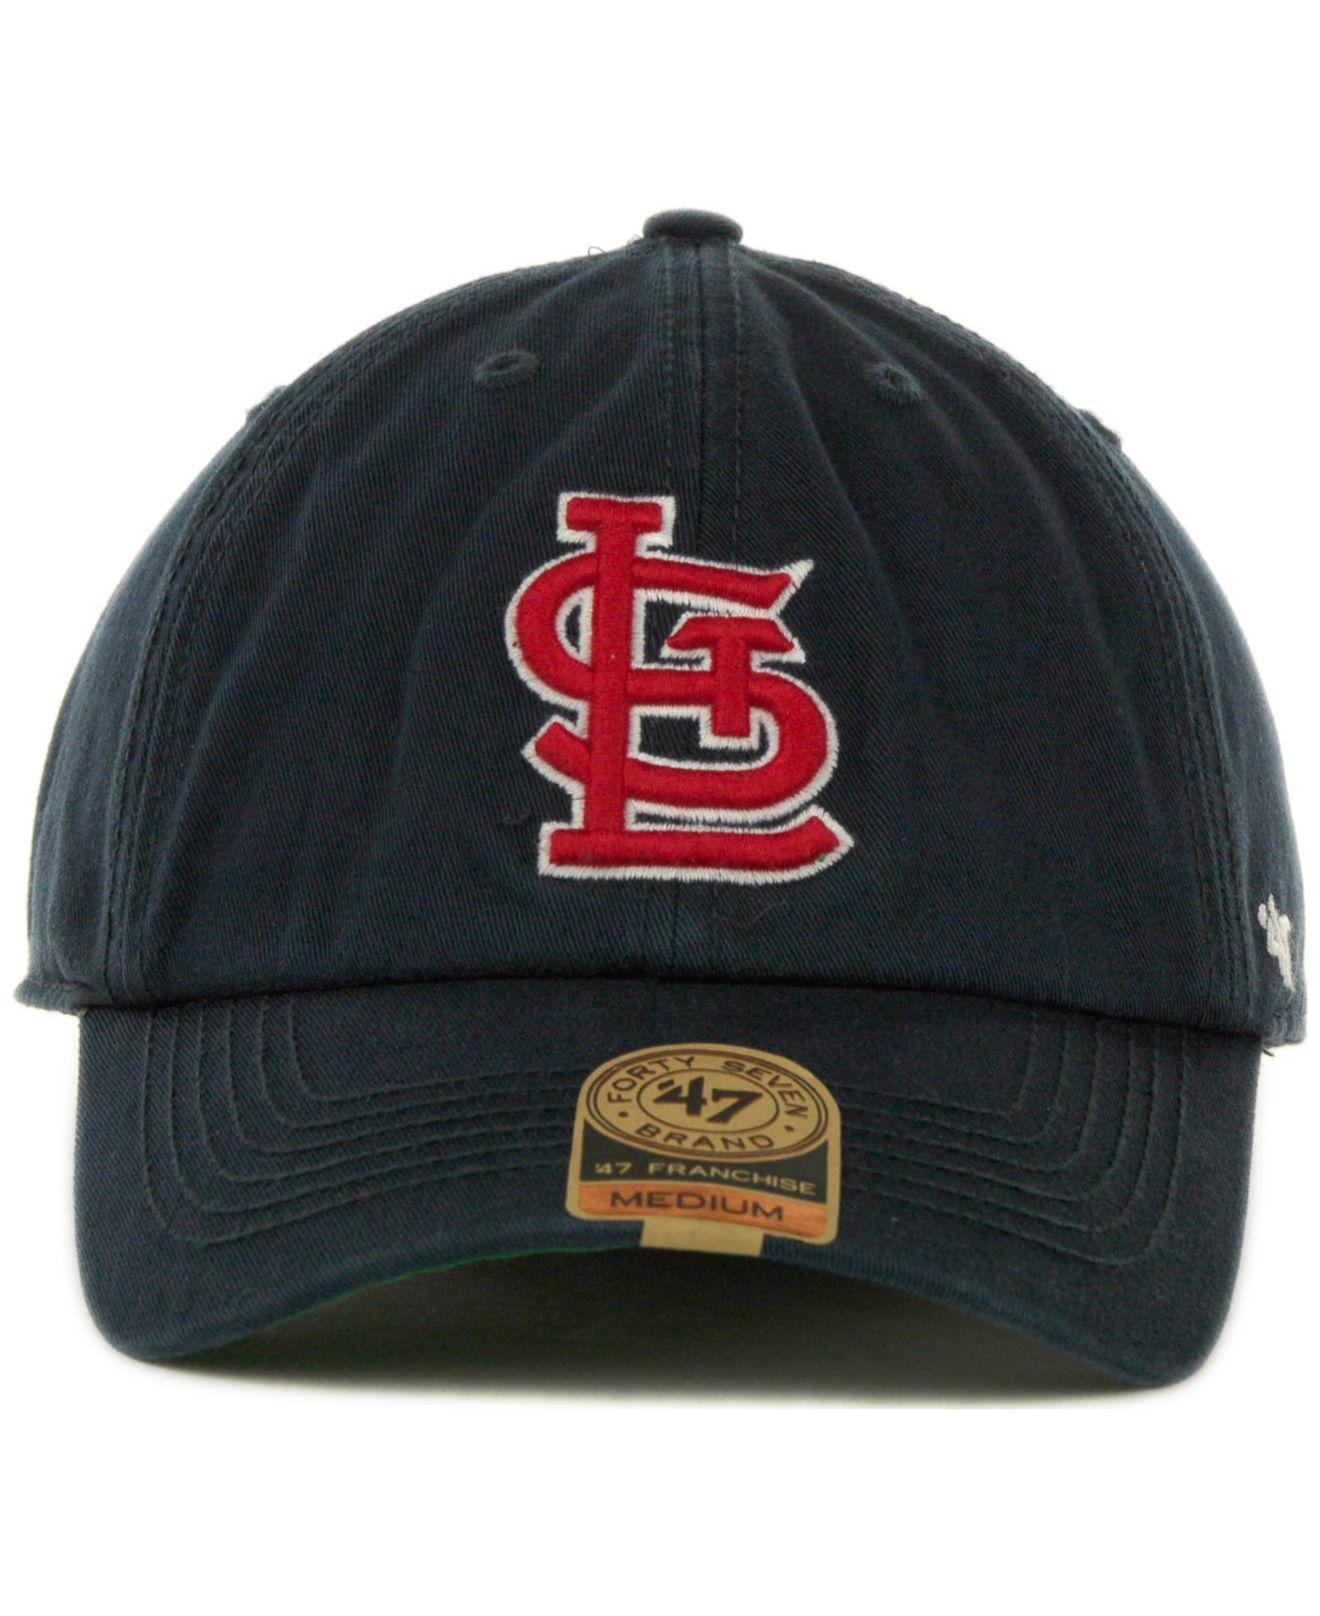 Men's '47 Navy/Red St. Louis Cardinals Cooperstown Collection Franchise  Logo Fitted Hat